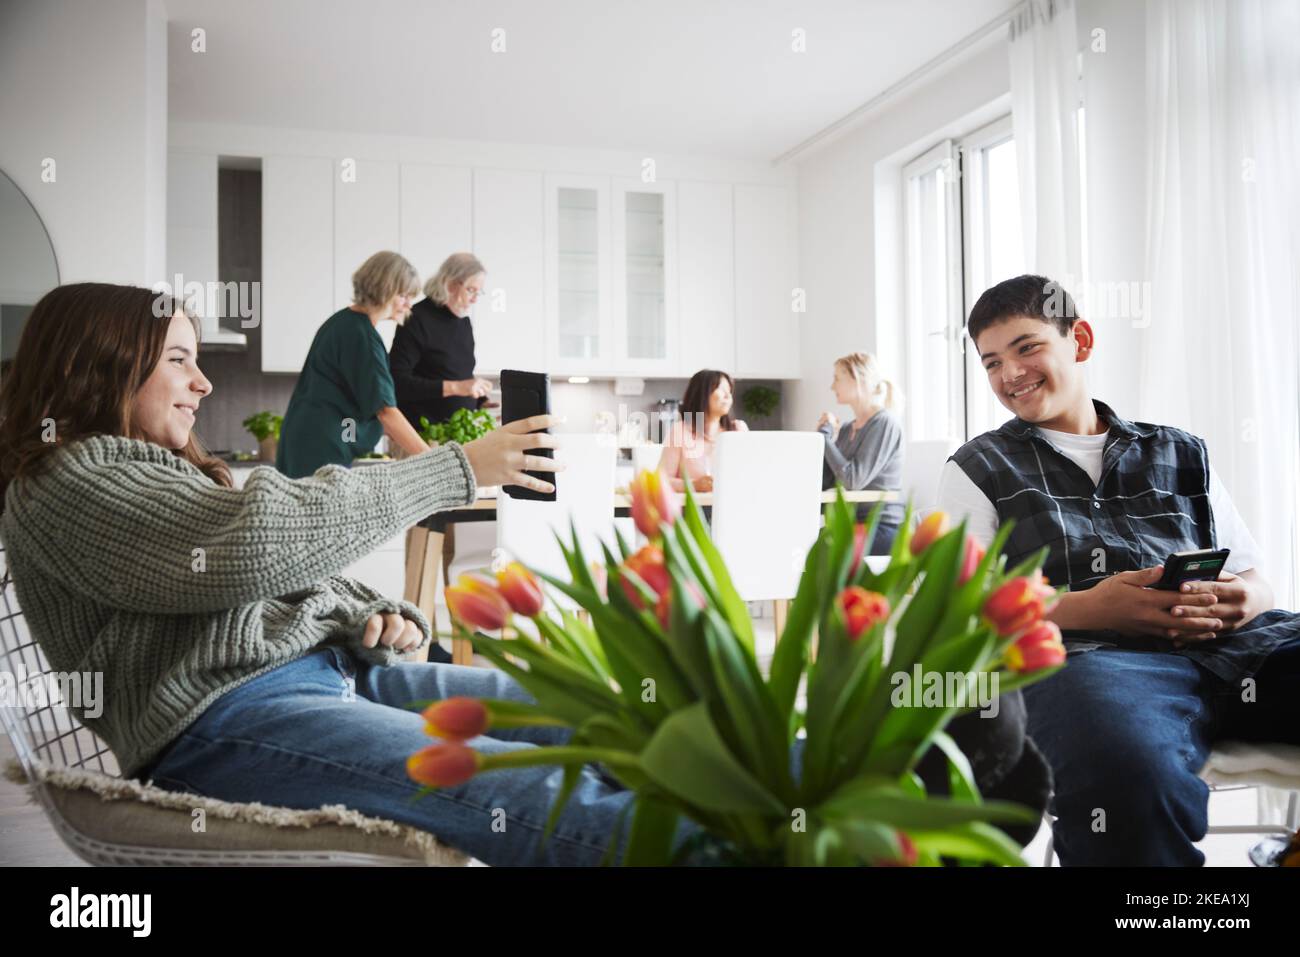 Family spending time together at home Stock Photo